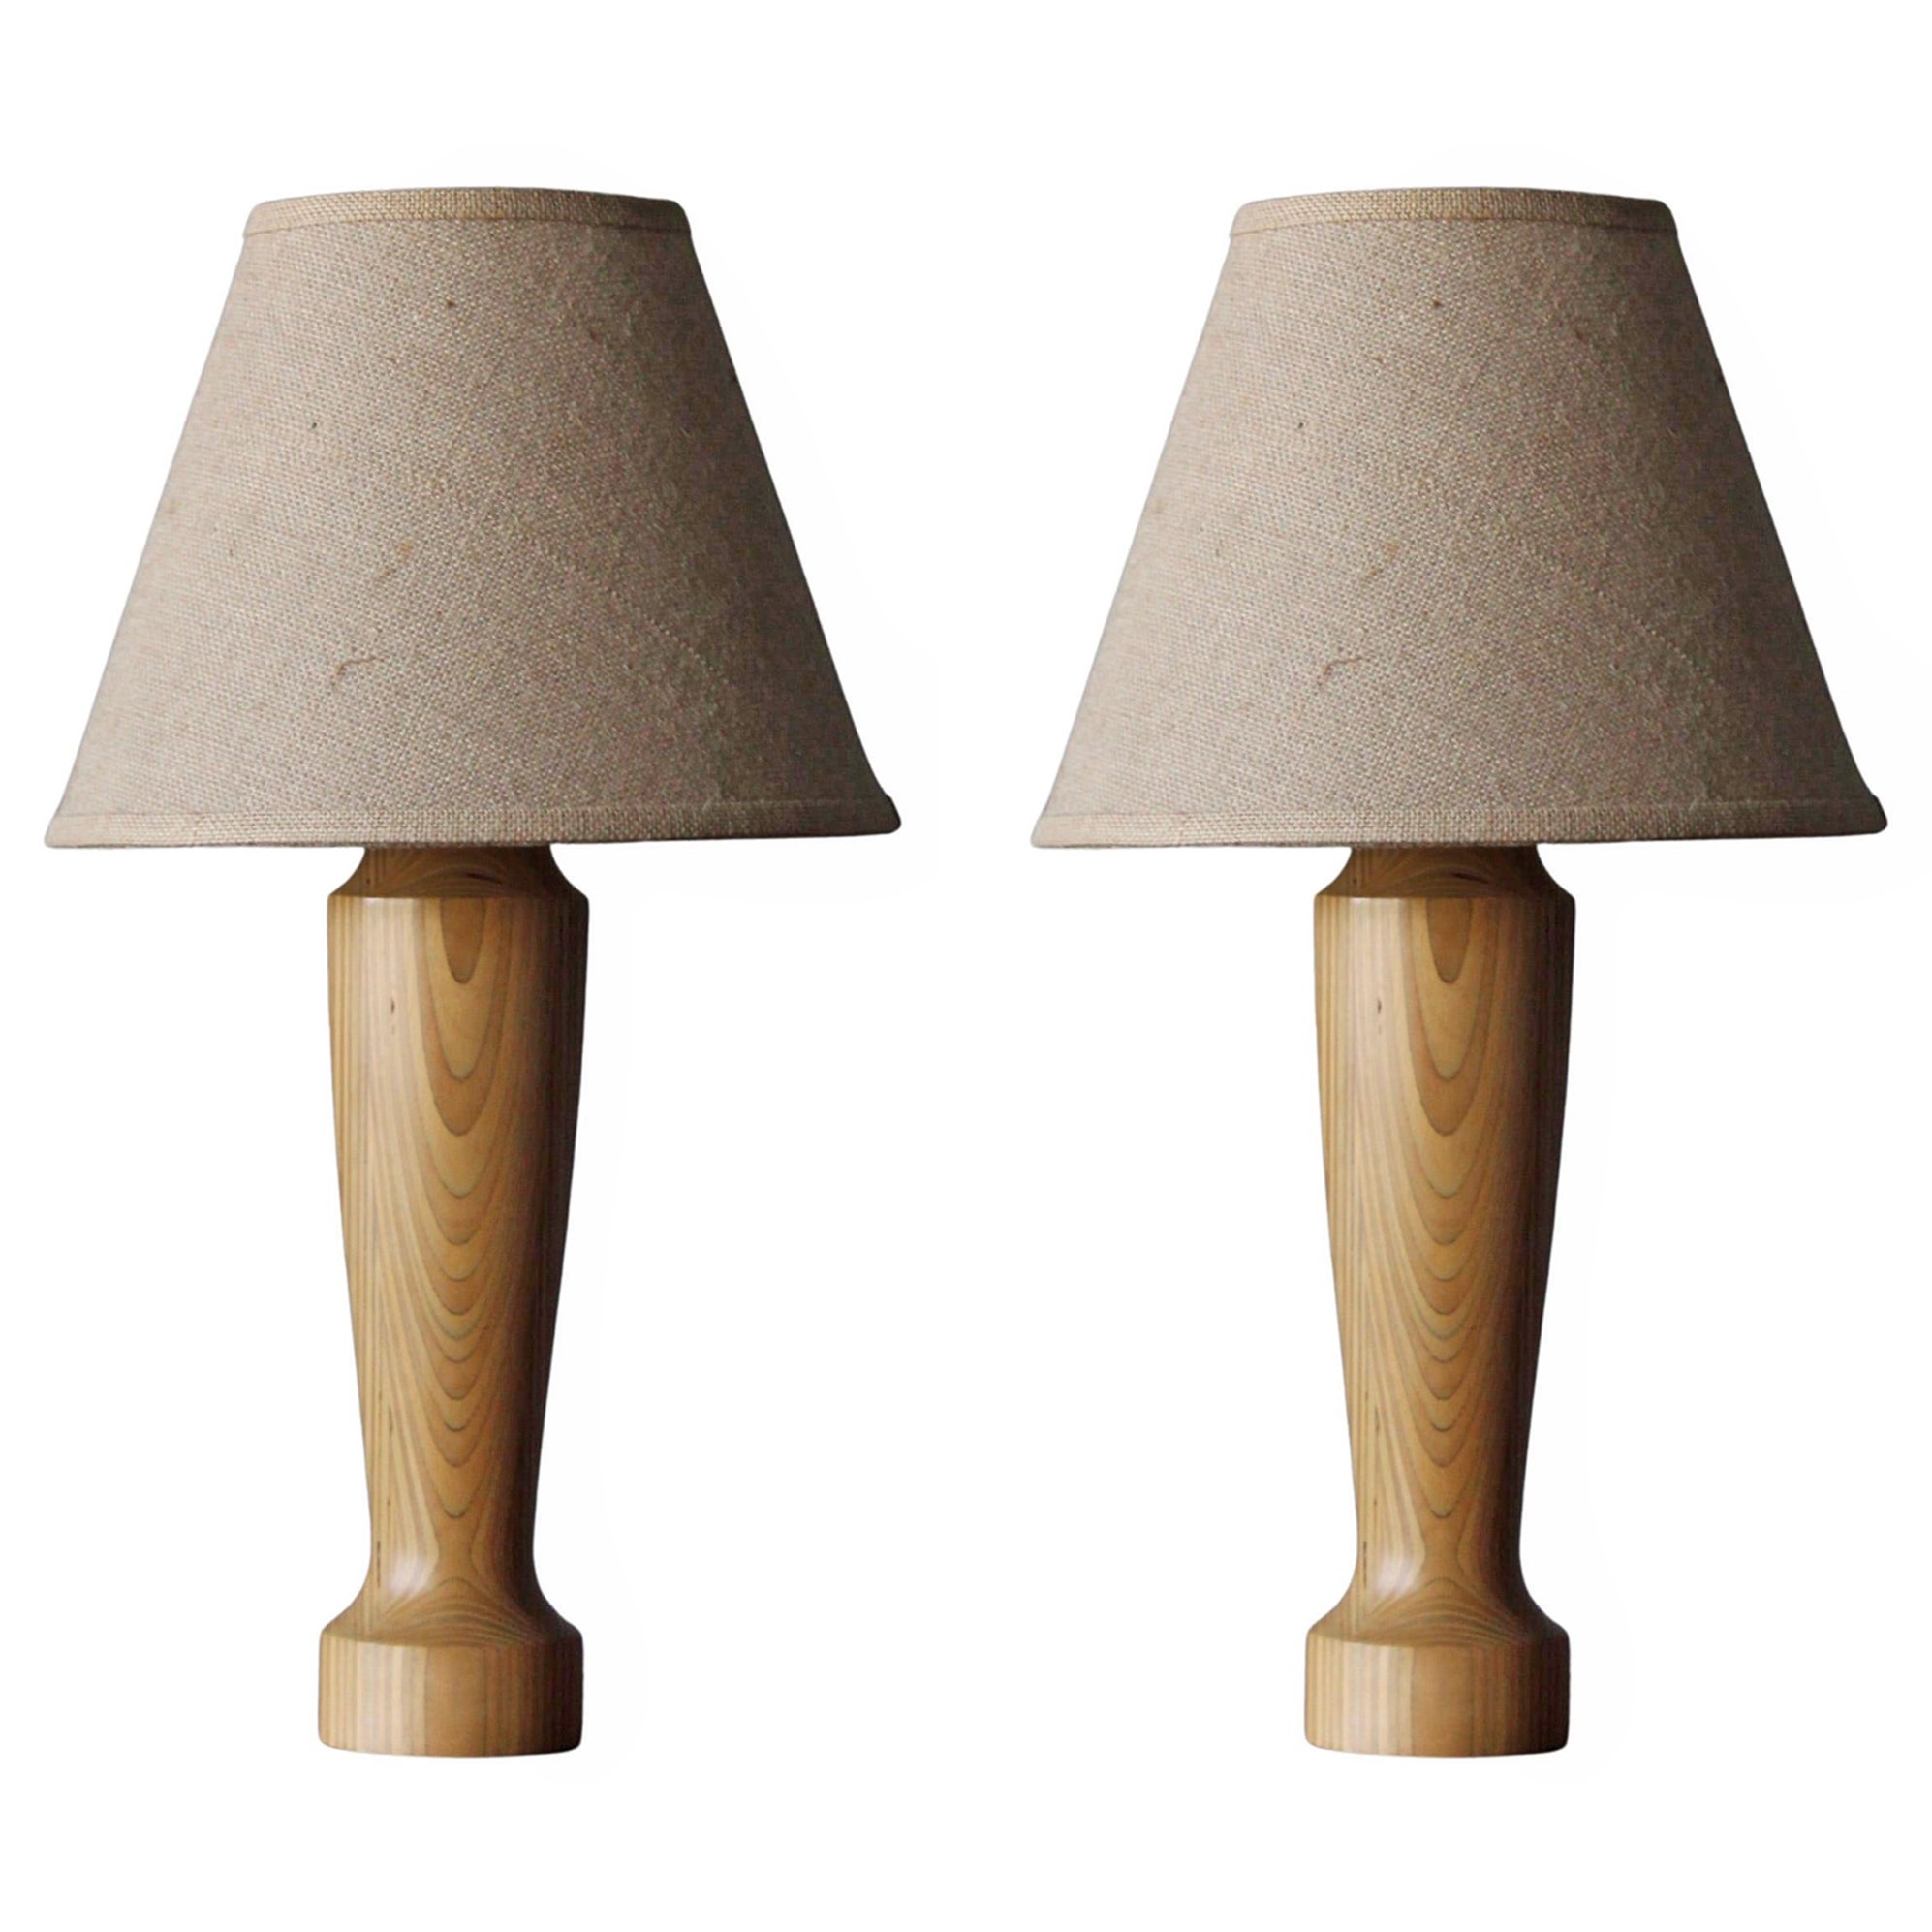 Swedish, Modernist Table Lamps, Laminated Turned Wood, Fabric, Sweden, 1960s For Sale